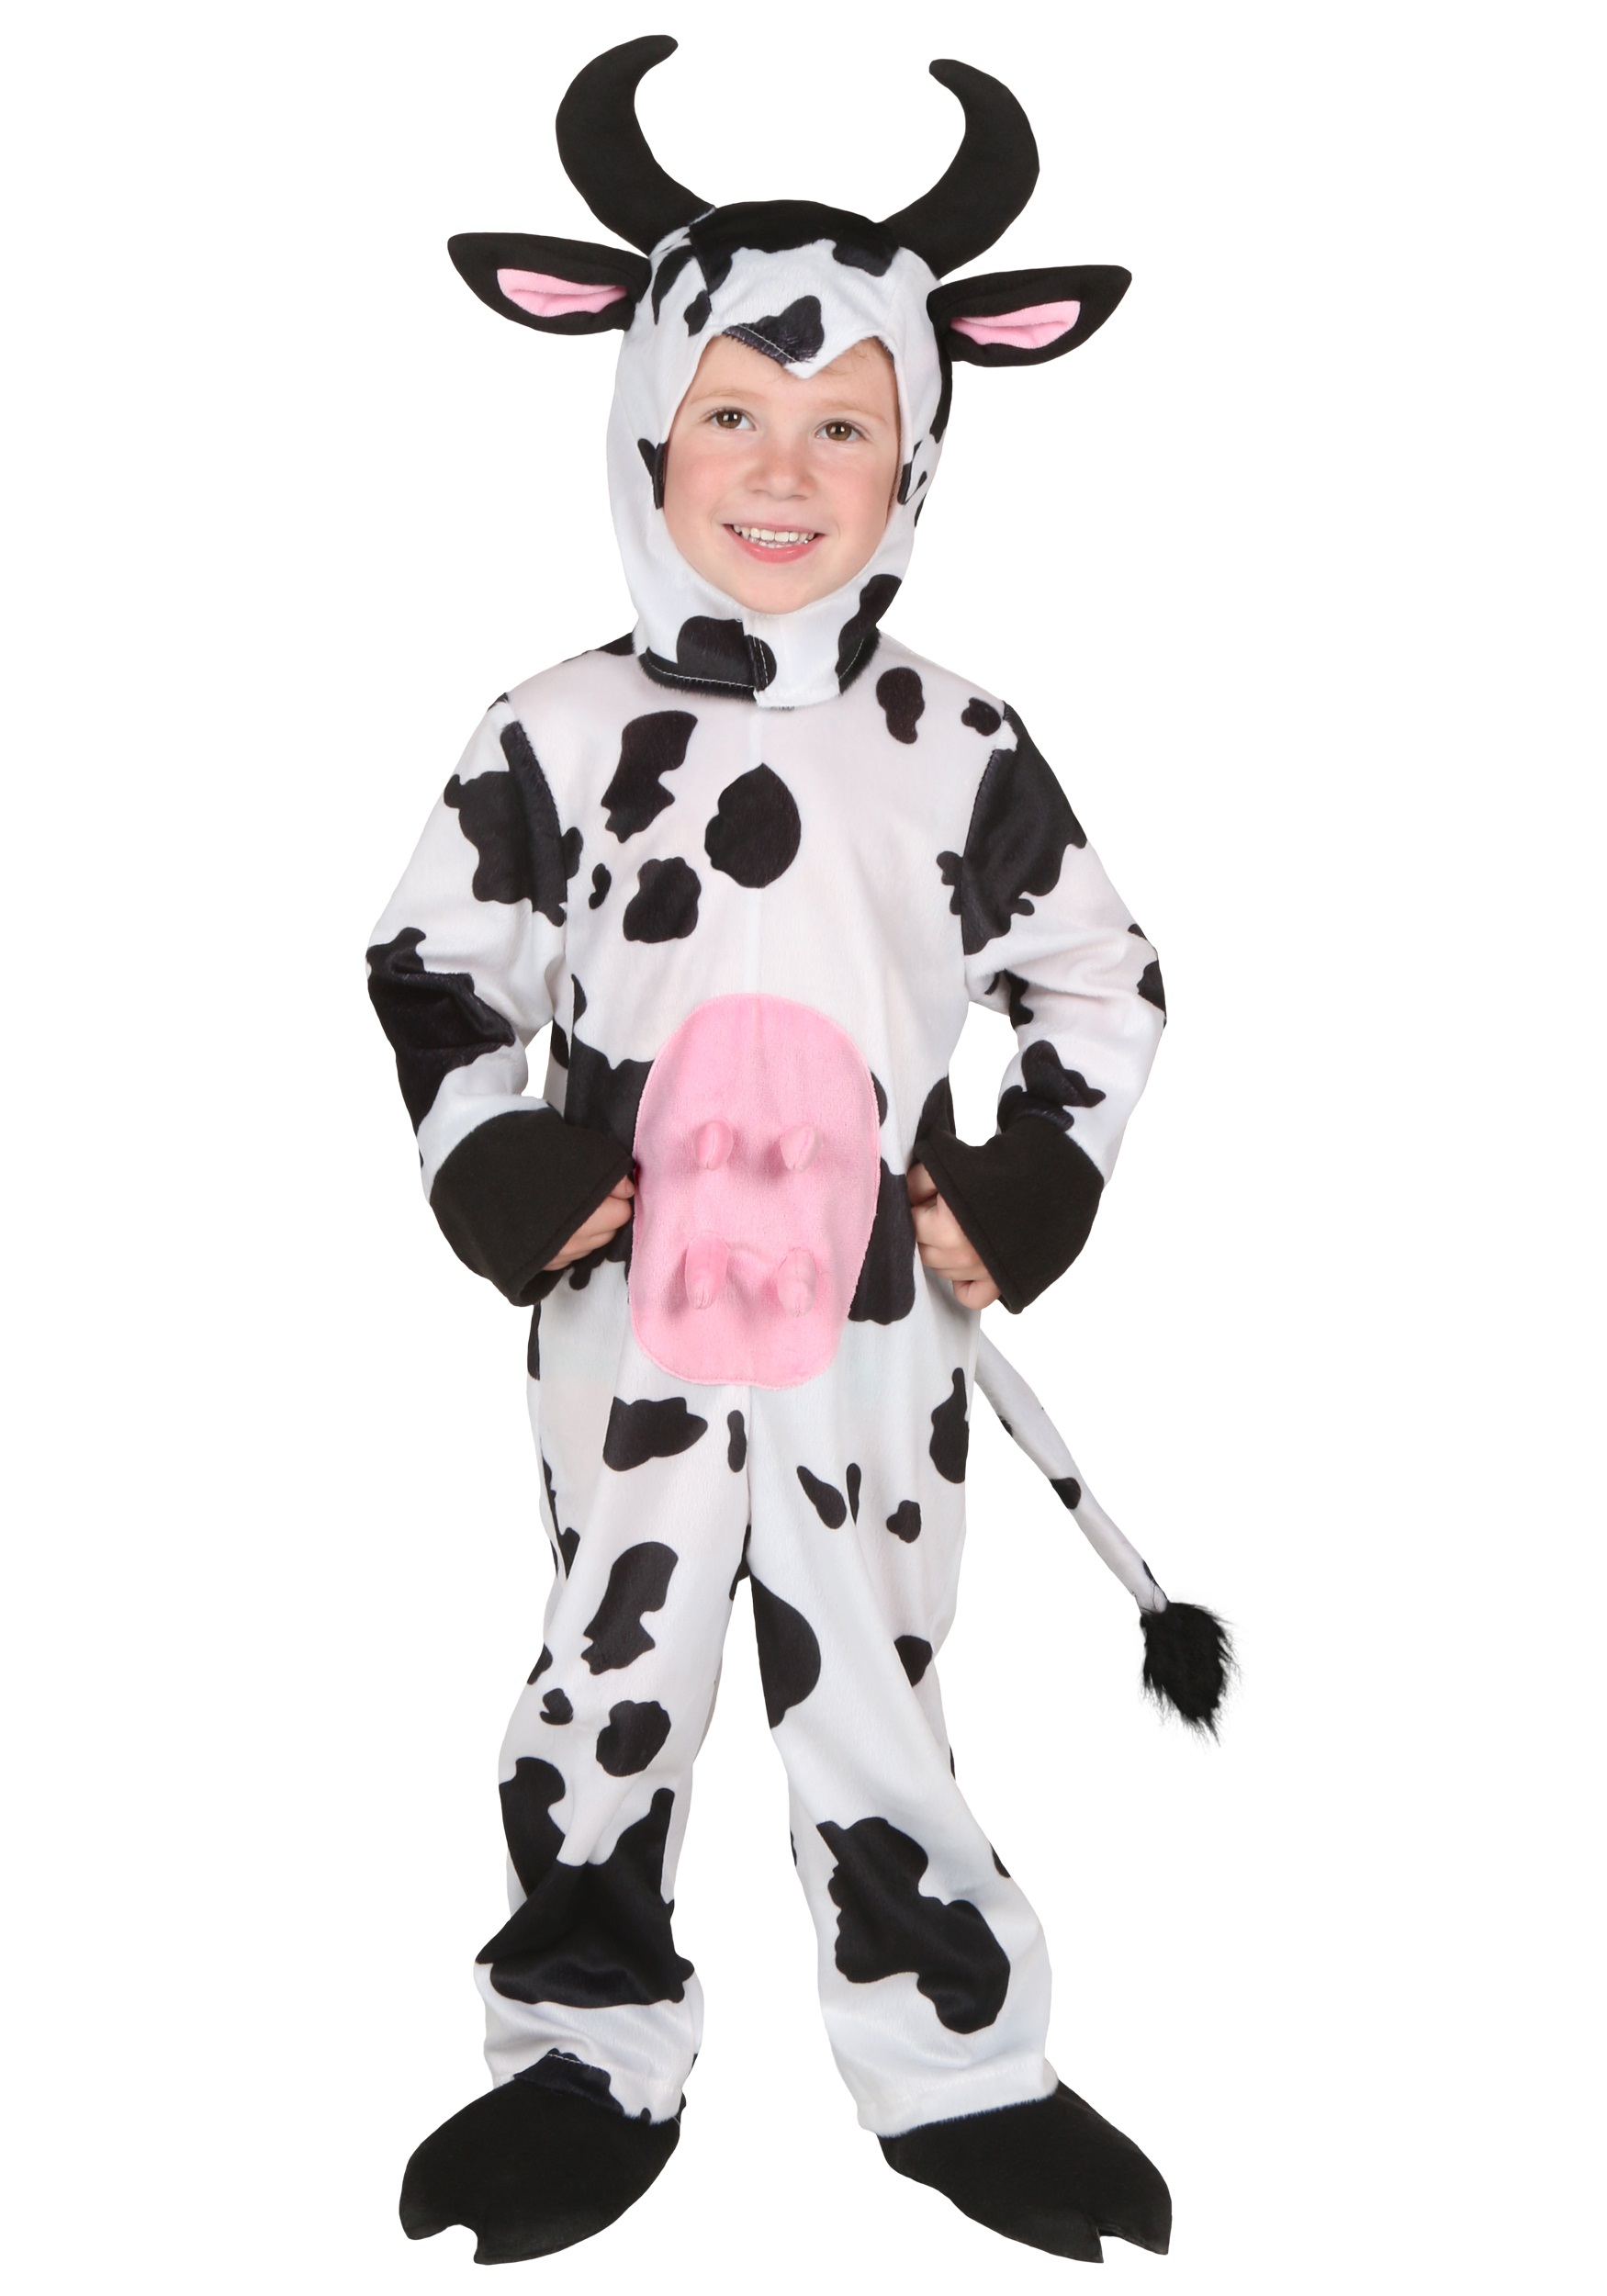 Photos - Fancy Dress Toddler FUN Costumes  Cow Deluxe Costume Black/White FUN2930TD 